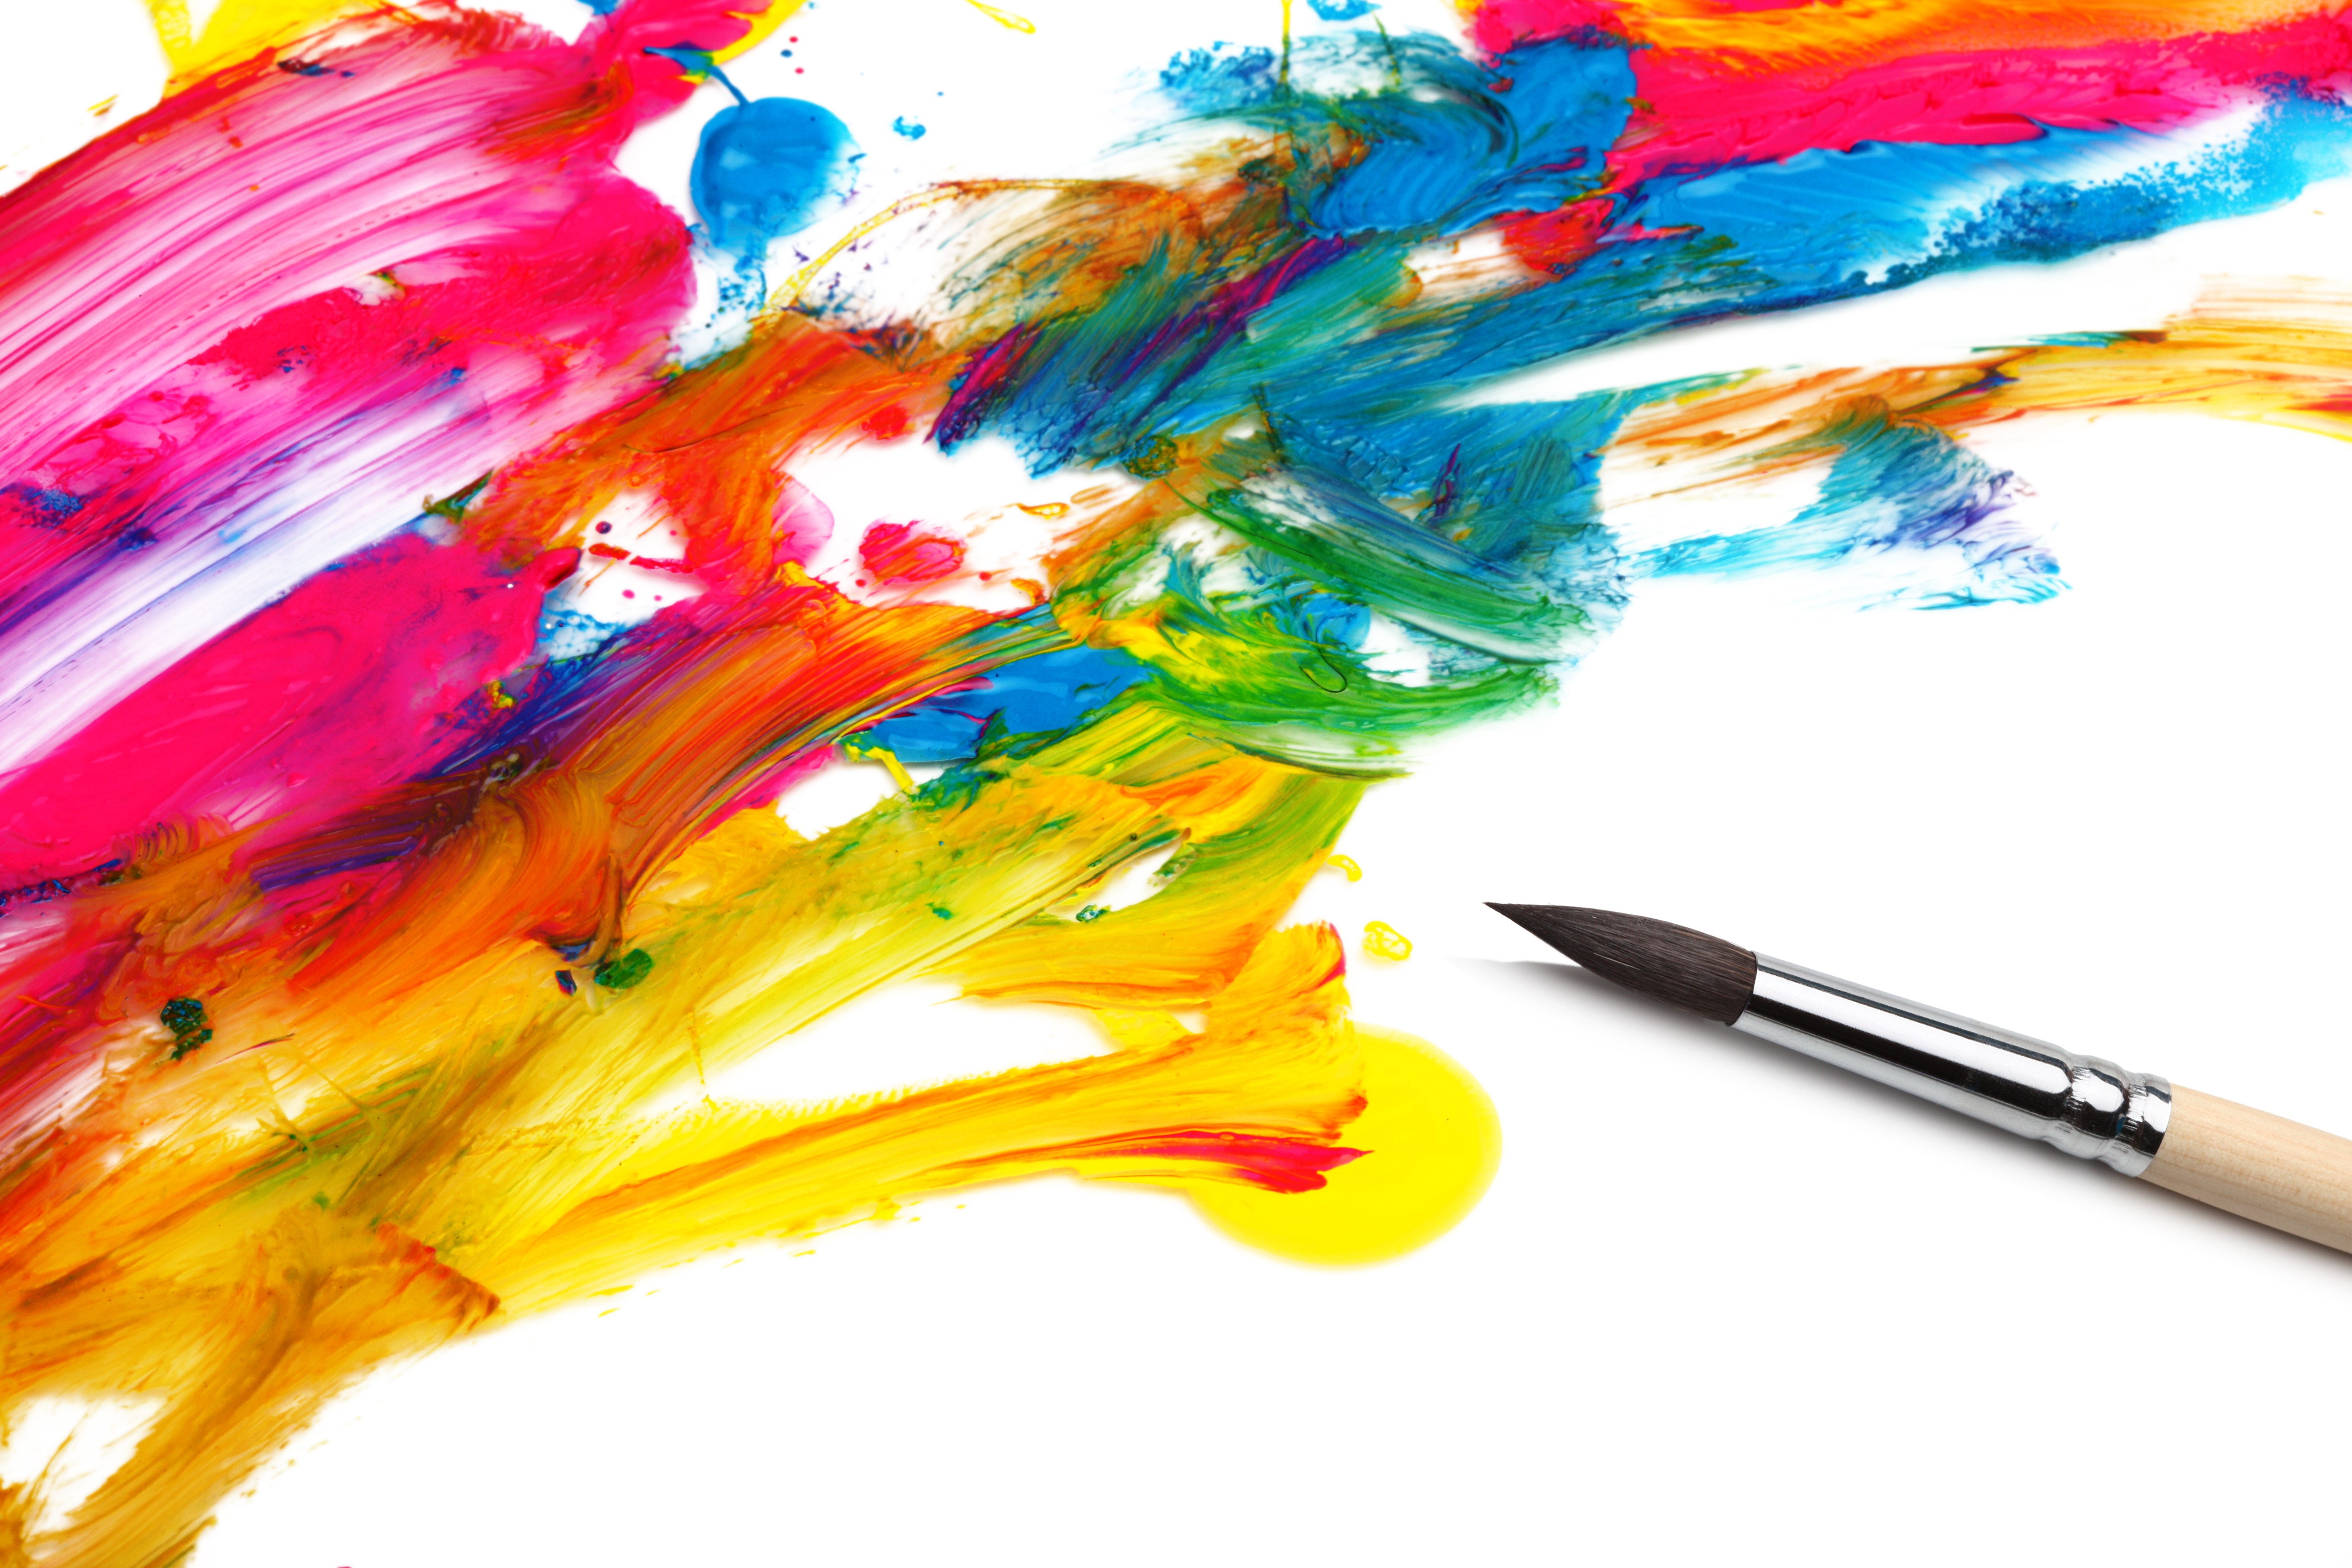 Colorful Art HD Wallpaper Free   New HD Wallpapers